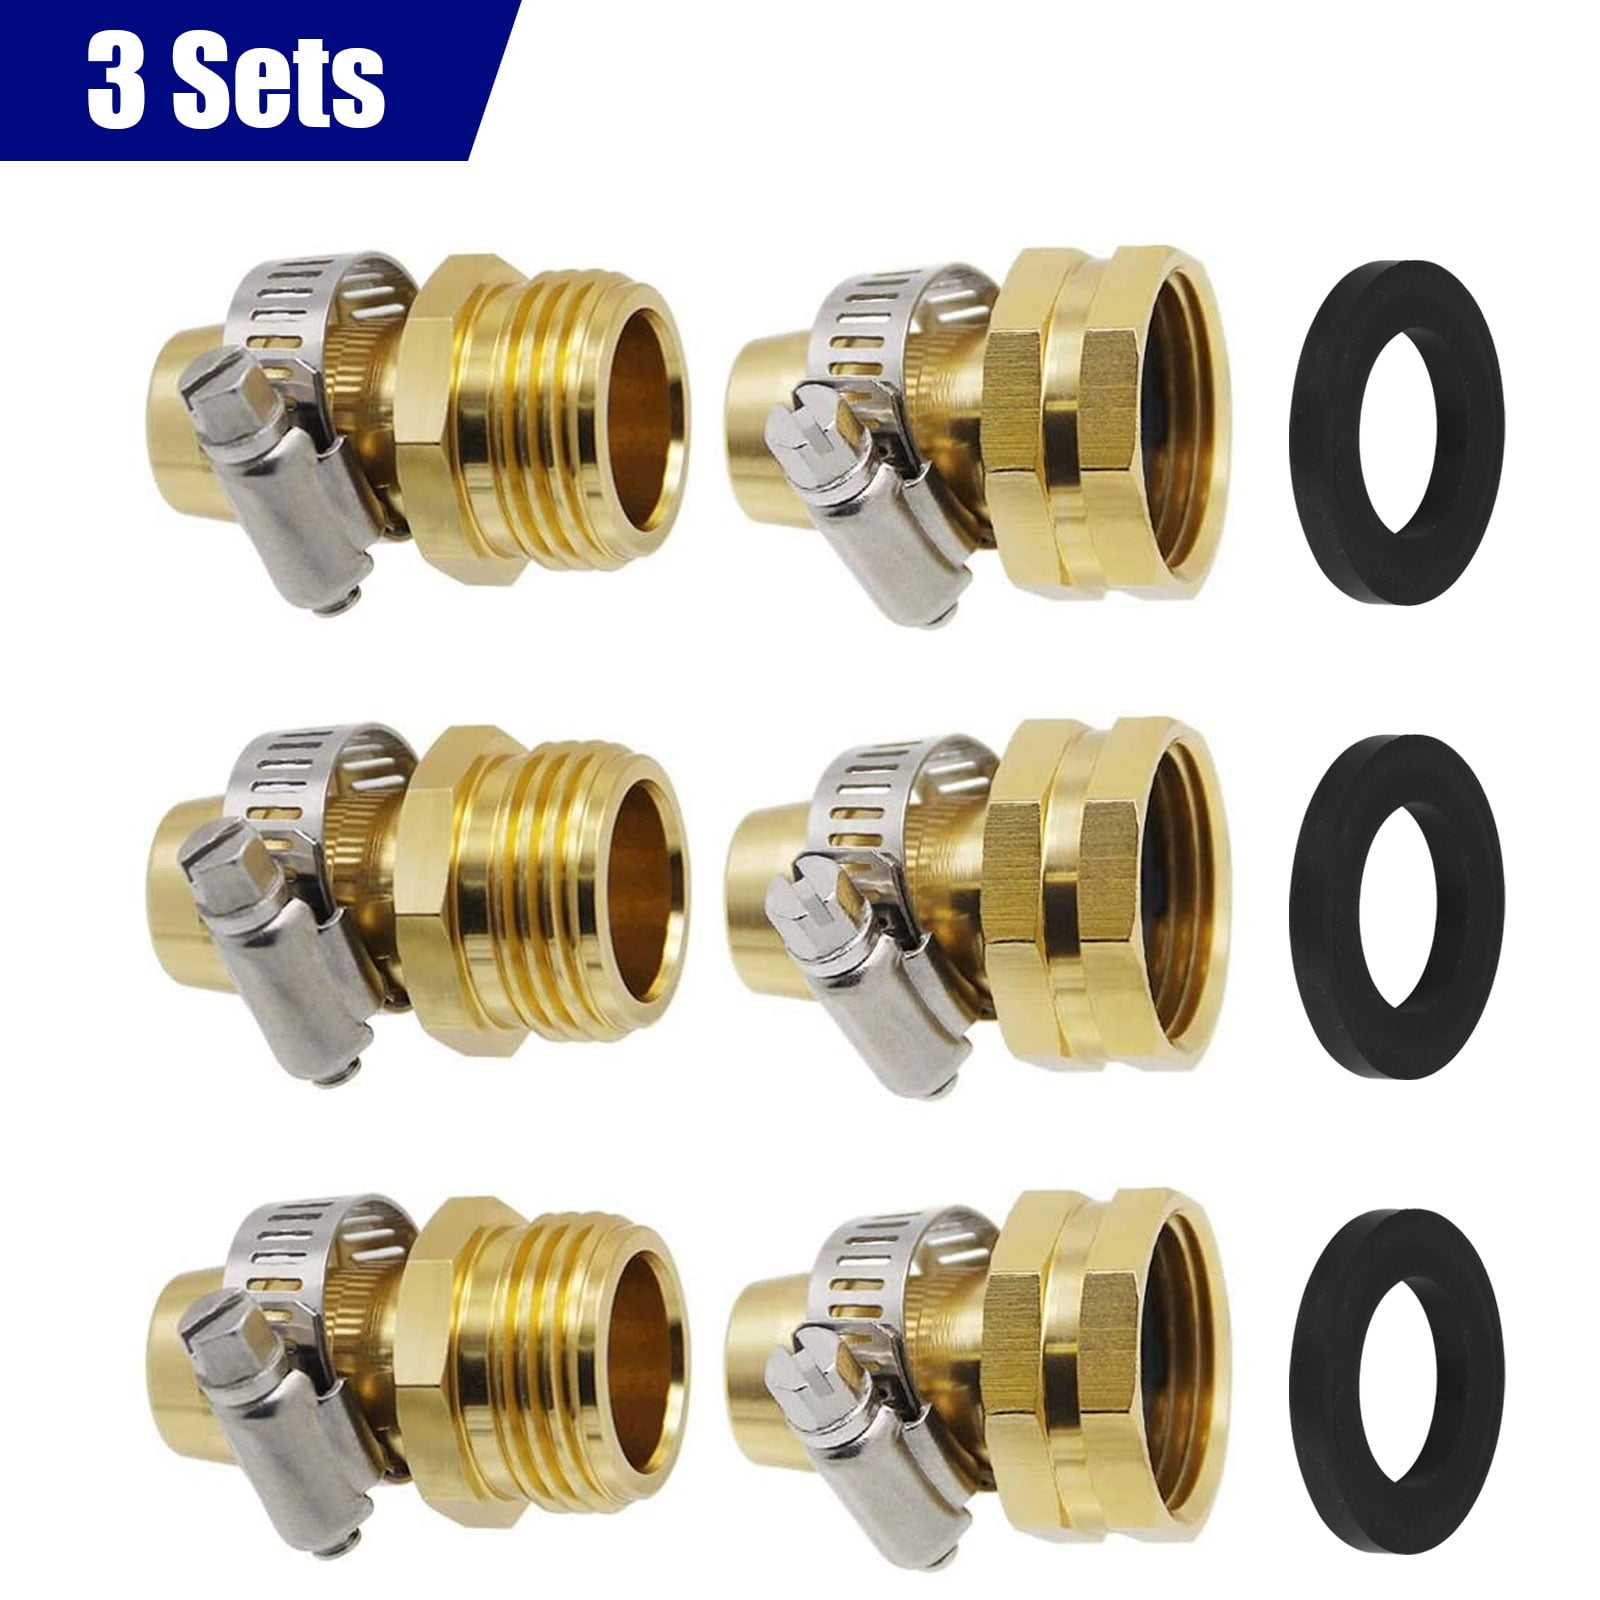 3sets of Brass Male and Female 3/4 Inch Garden Hose End Quick Connectors for sale online 